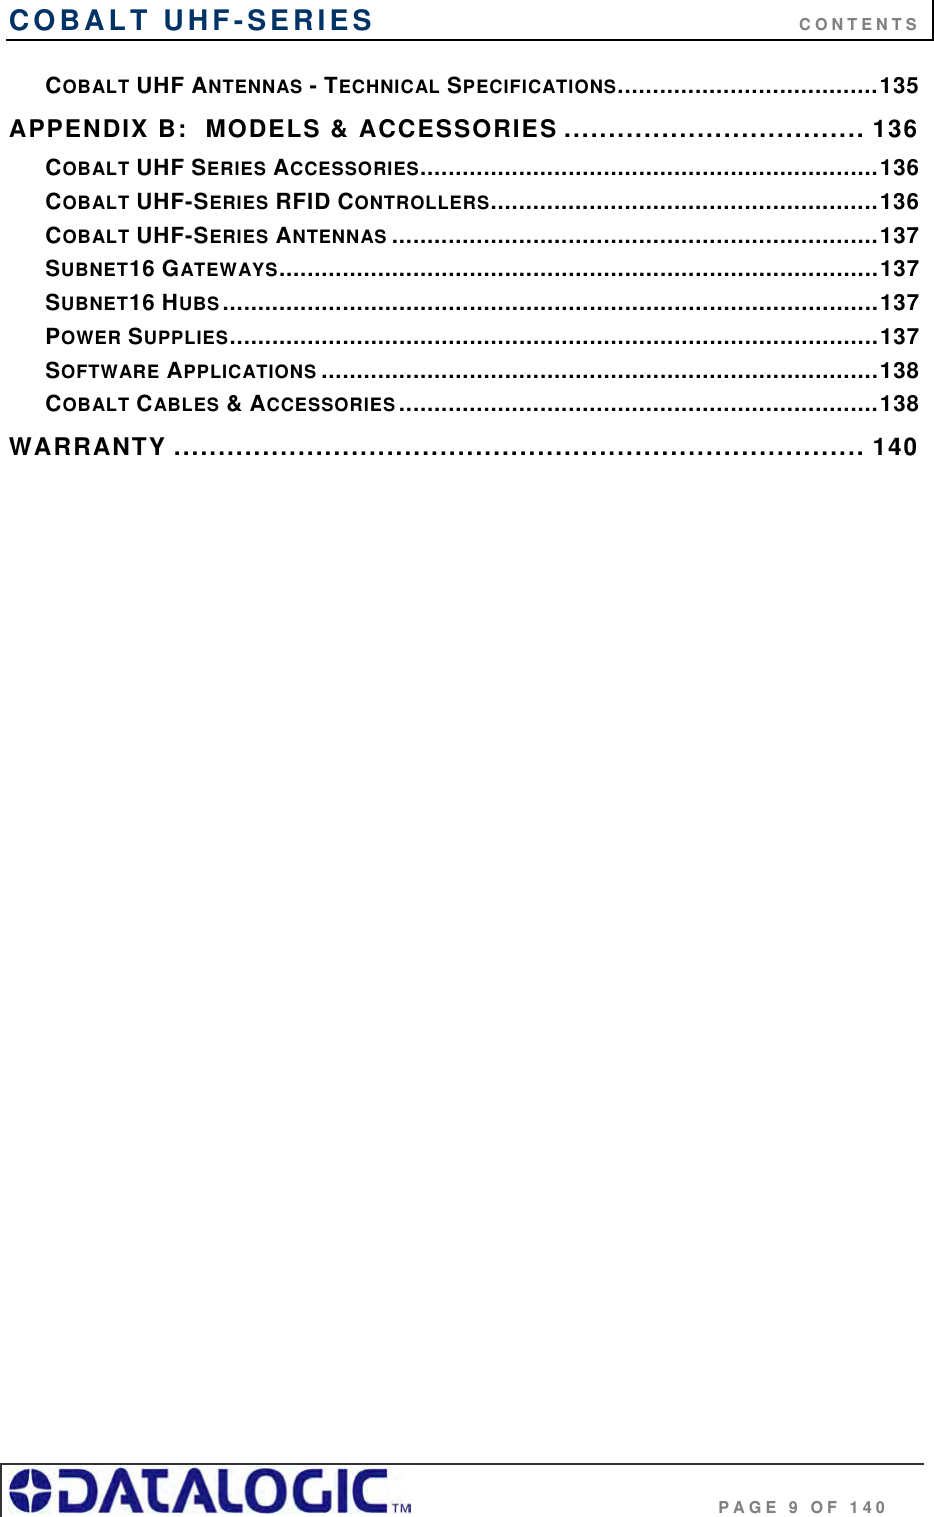 COBALT UHF-SERIES      CONTENTS                                     PAGE 9 OF 140 COBALT UHF ANTENNAS - TECHNICAL SPECIFICATIONS.....................................135 APPENDIX B:  MODELS &amp; ACCESSORIES .................................. 136 COBALT UHF SERIES ACCESSORIES.................................................................136 COBALT UHF-SERIES RFID CONTROLLERS.......................................................136 COBALT UHF-SERIES ANTENNAS .....................................................................137 SUBNET16 GATEWAYS.....................................................................................137 SUBNET16 HUBS.............................................................................................137 POWER SUPPLIES............................................................................................137 SOFTWARE APPLICATIONS ...............................................................................138 COBALT CABLES &amp; ACCESSORIES ....................................................................138 WARRANTY .............................................................................. 140   